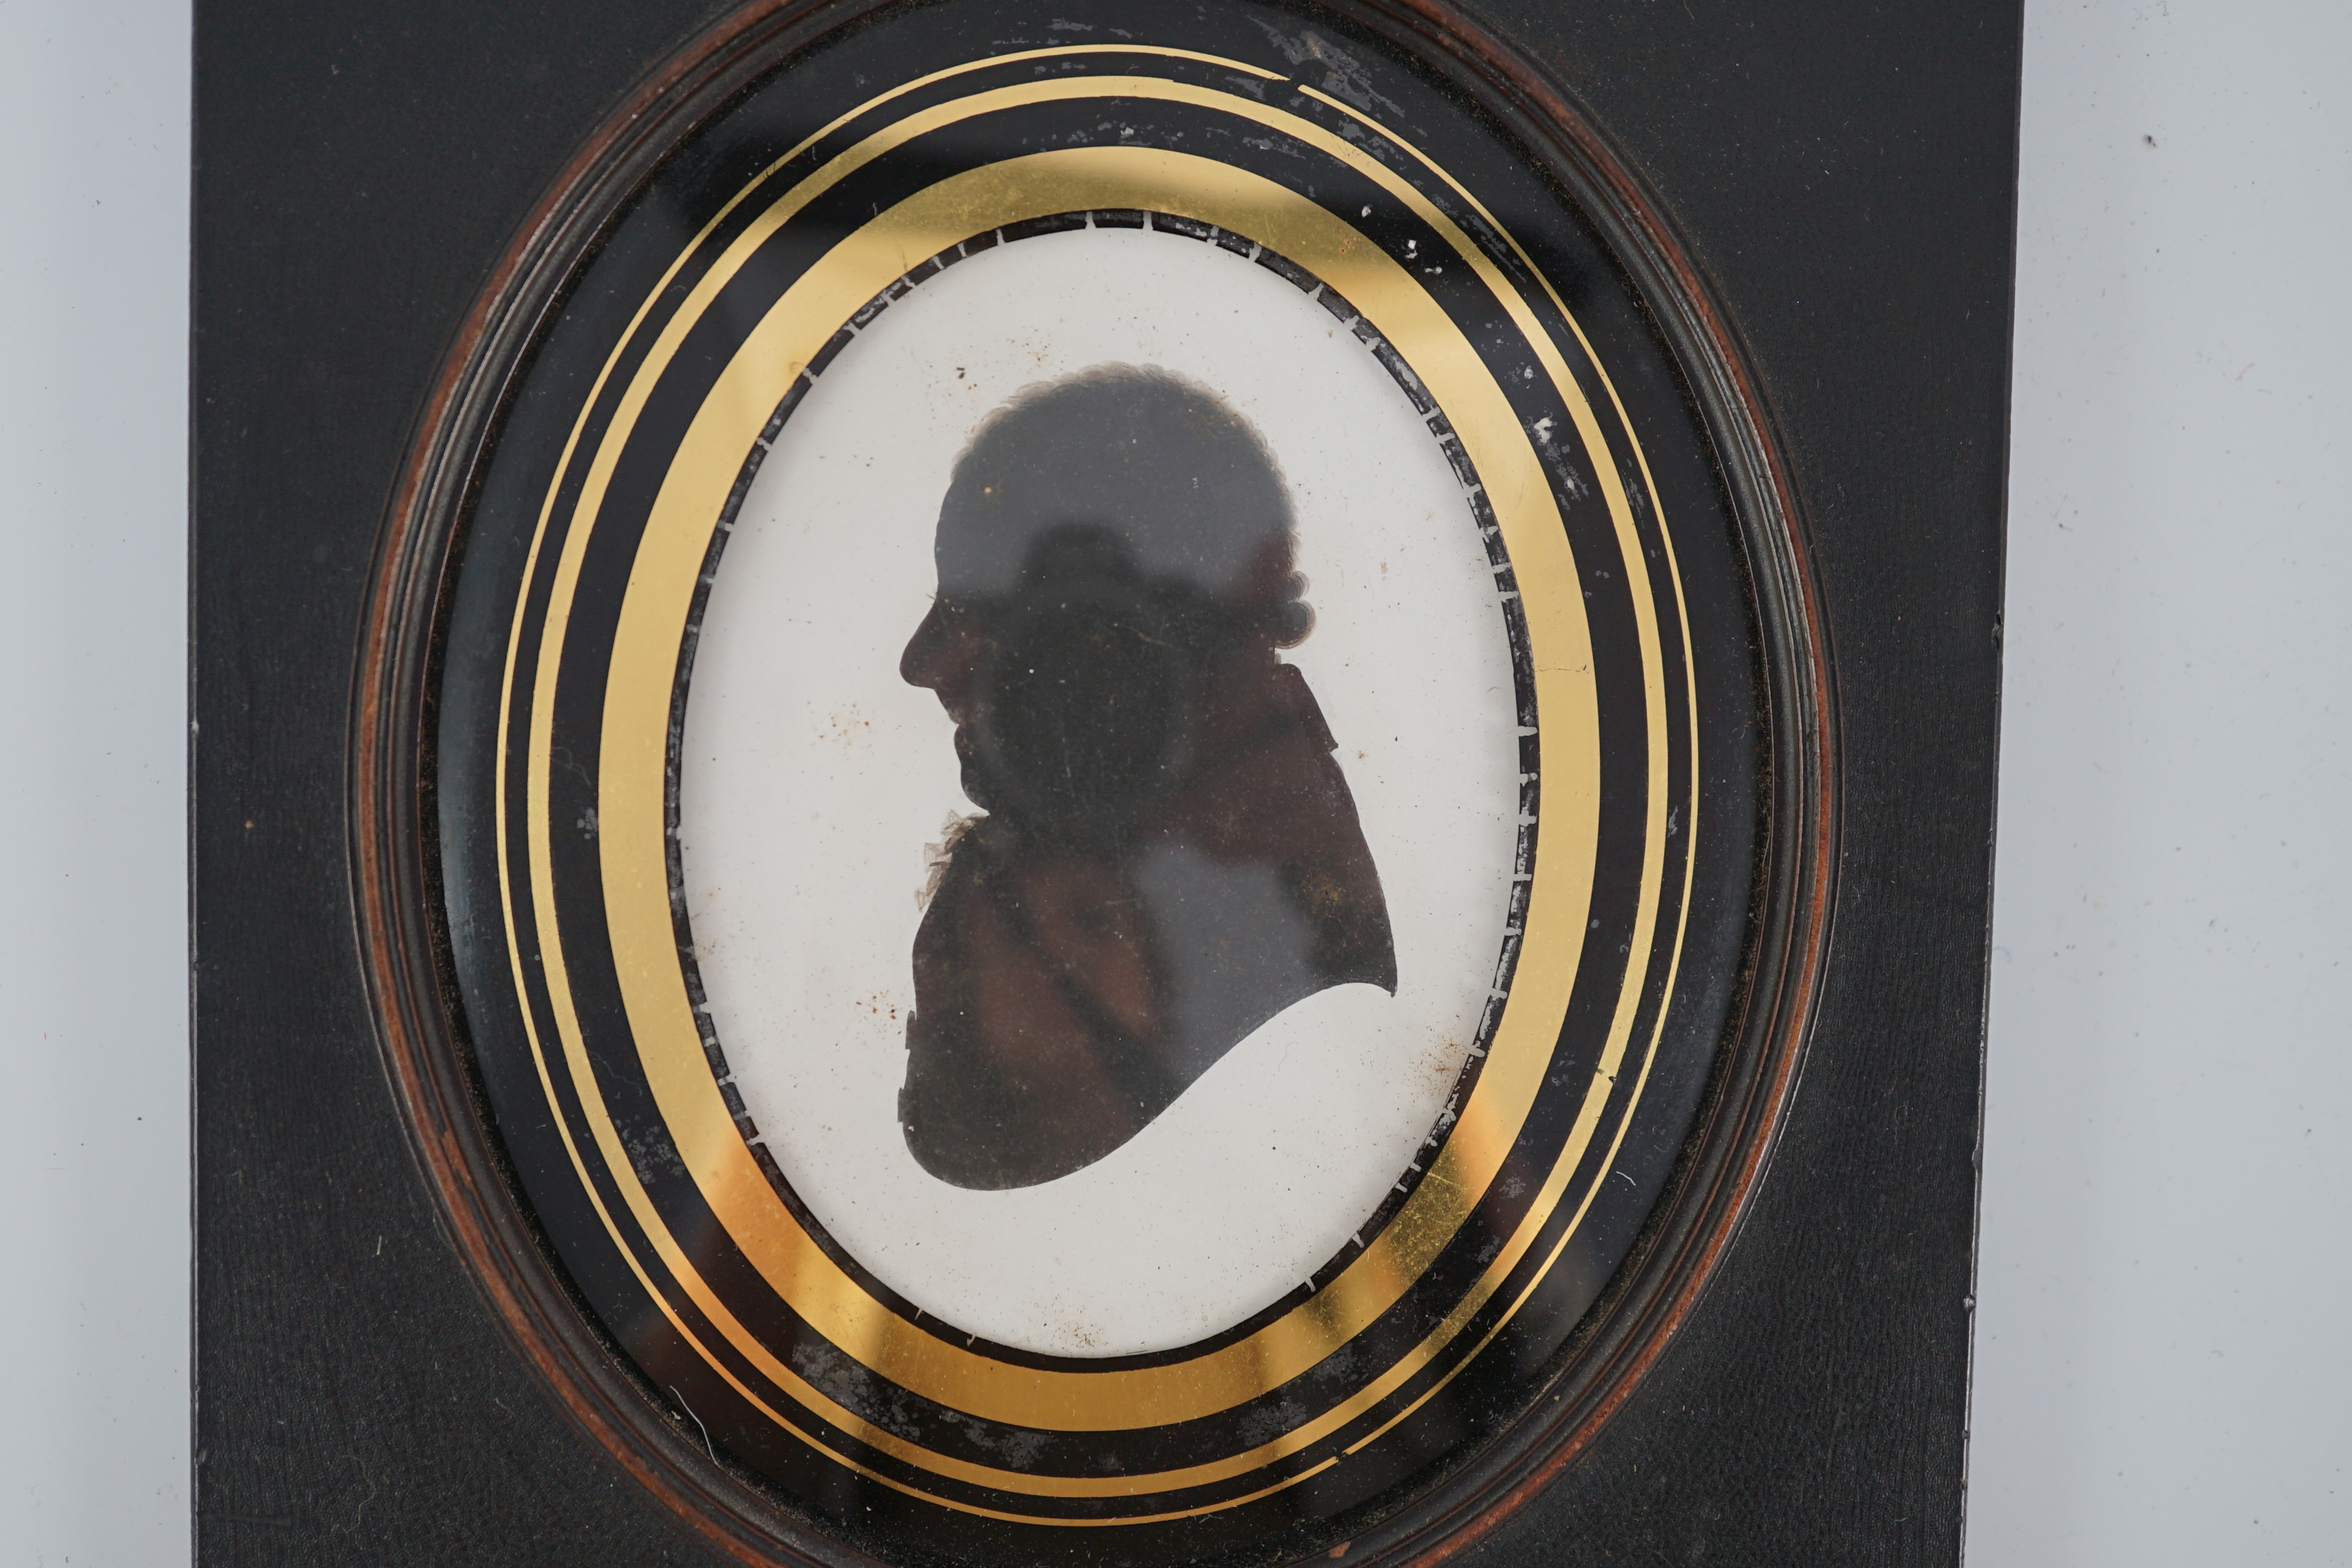 John Miers (1752-1821) and John Field (1772-1848), Silhouette of a gentleman, painted plaster, 8.2 x 6cm.